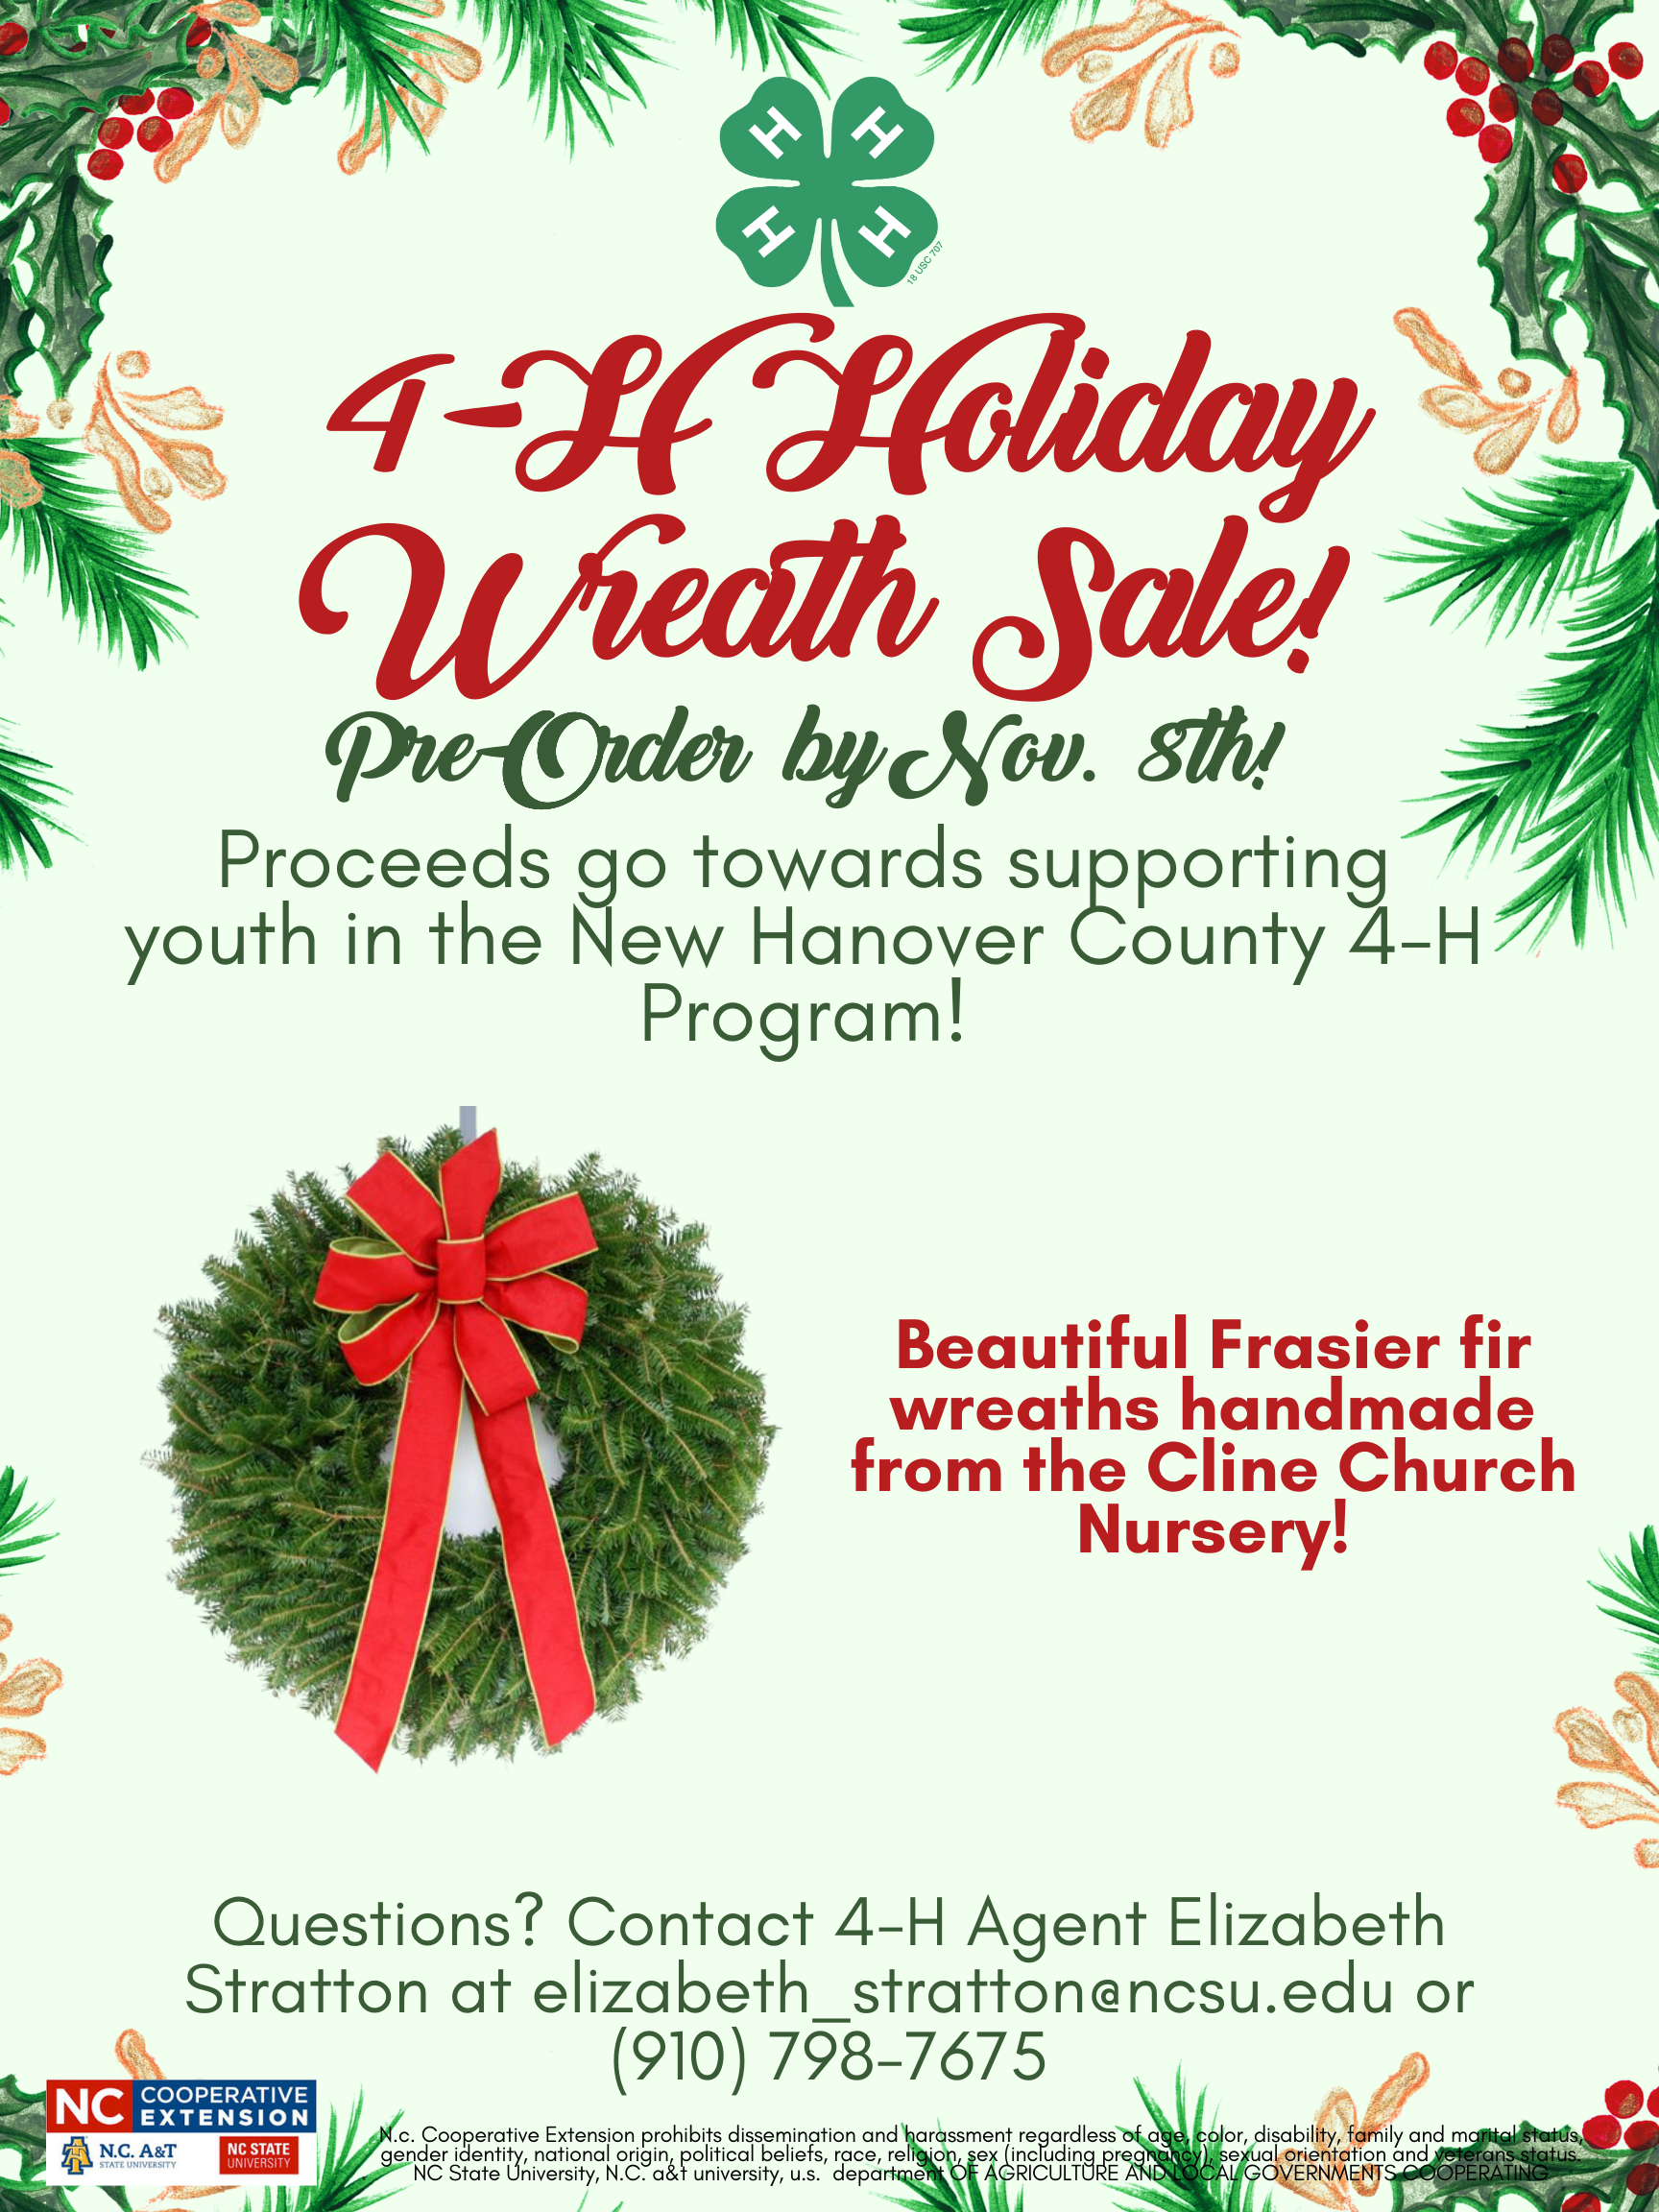 4-H Holiday Wreath Sale